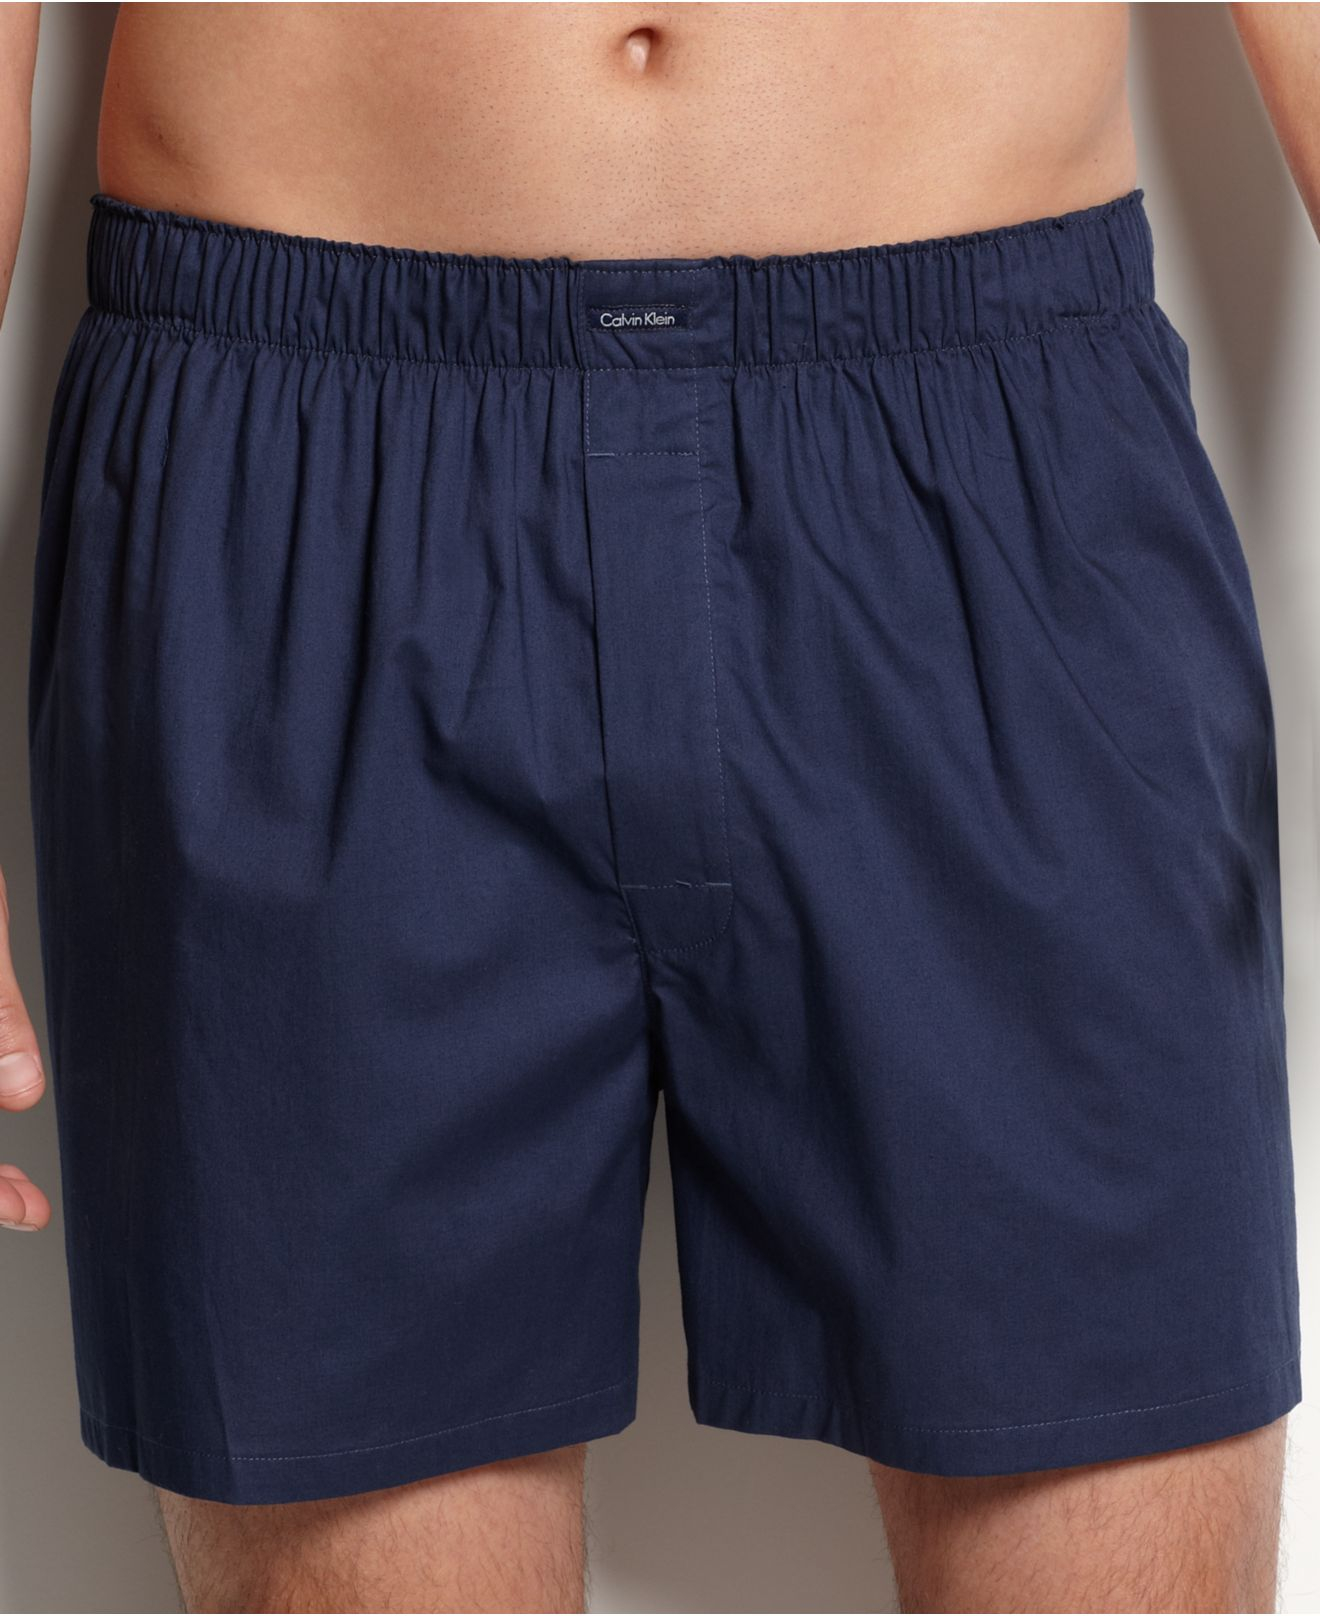 Calvin Klein Relaxed Fit Woven Boxer U1147 in Deep Sky (Blue) for Men - Lyst